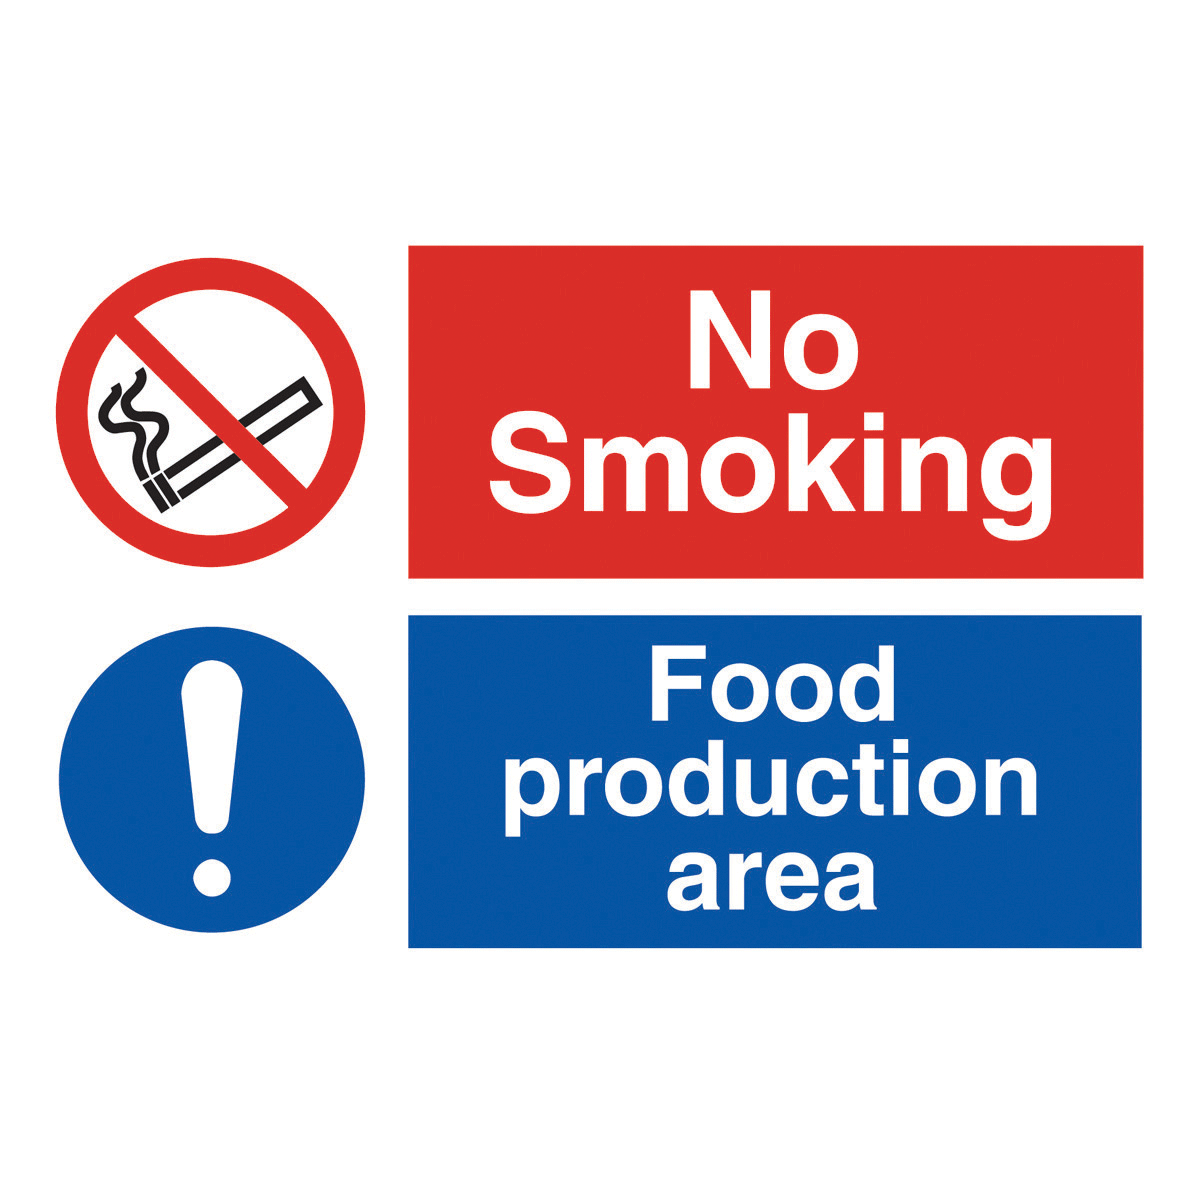 No Smoking Food Preparation Area Safety Sign - Hygiene Sign from ...